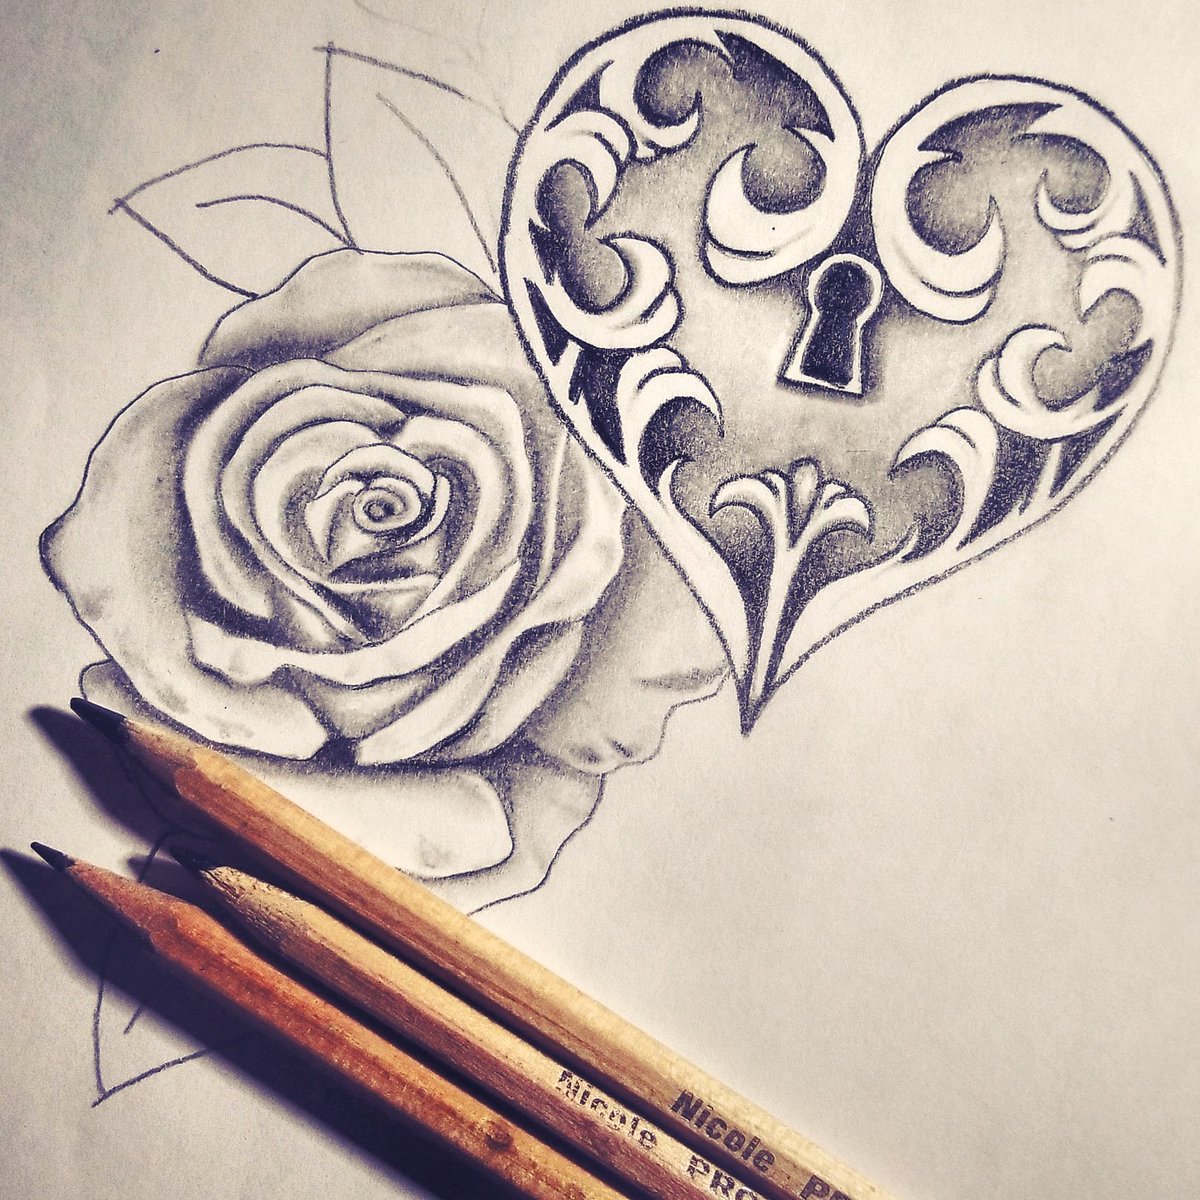 Discover 79+ heart and rose sketches best in.eteachers